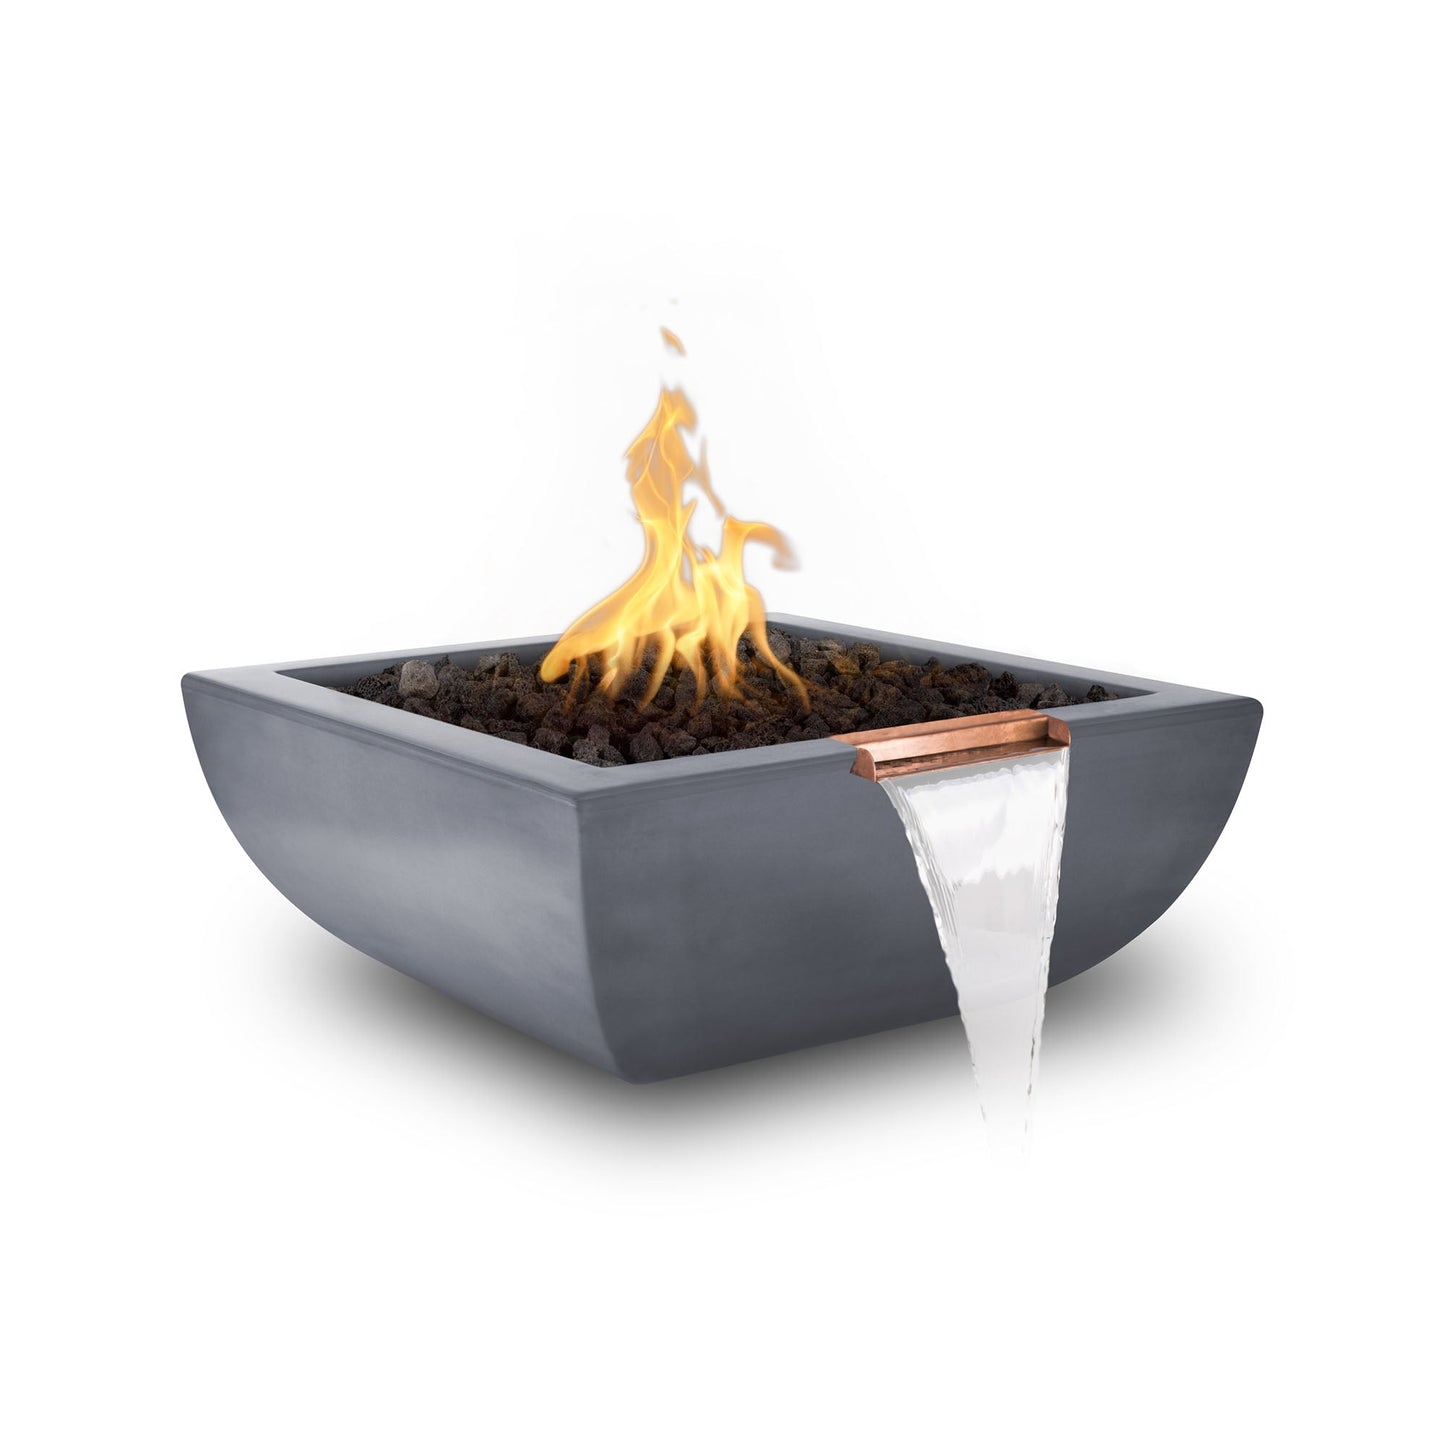 The Outdoor Plus Square Avalon 24" Metallic Copper GFRC Concrete Natural Gas Fire & Water Bowl with Match Lit with Flame Sense Ignition